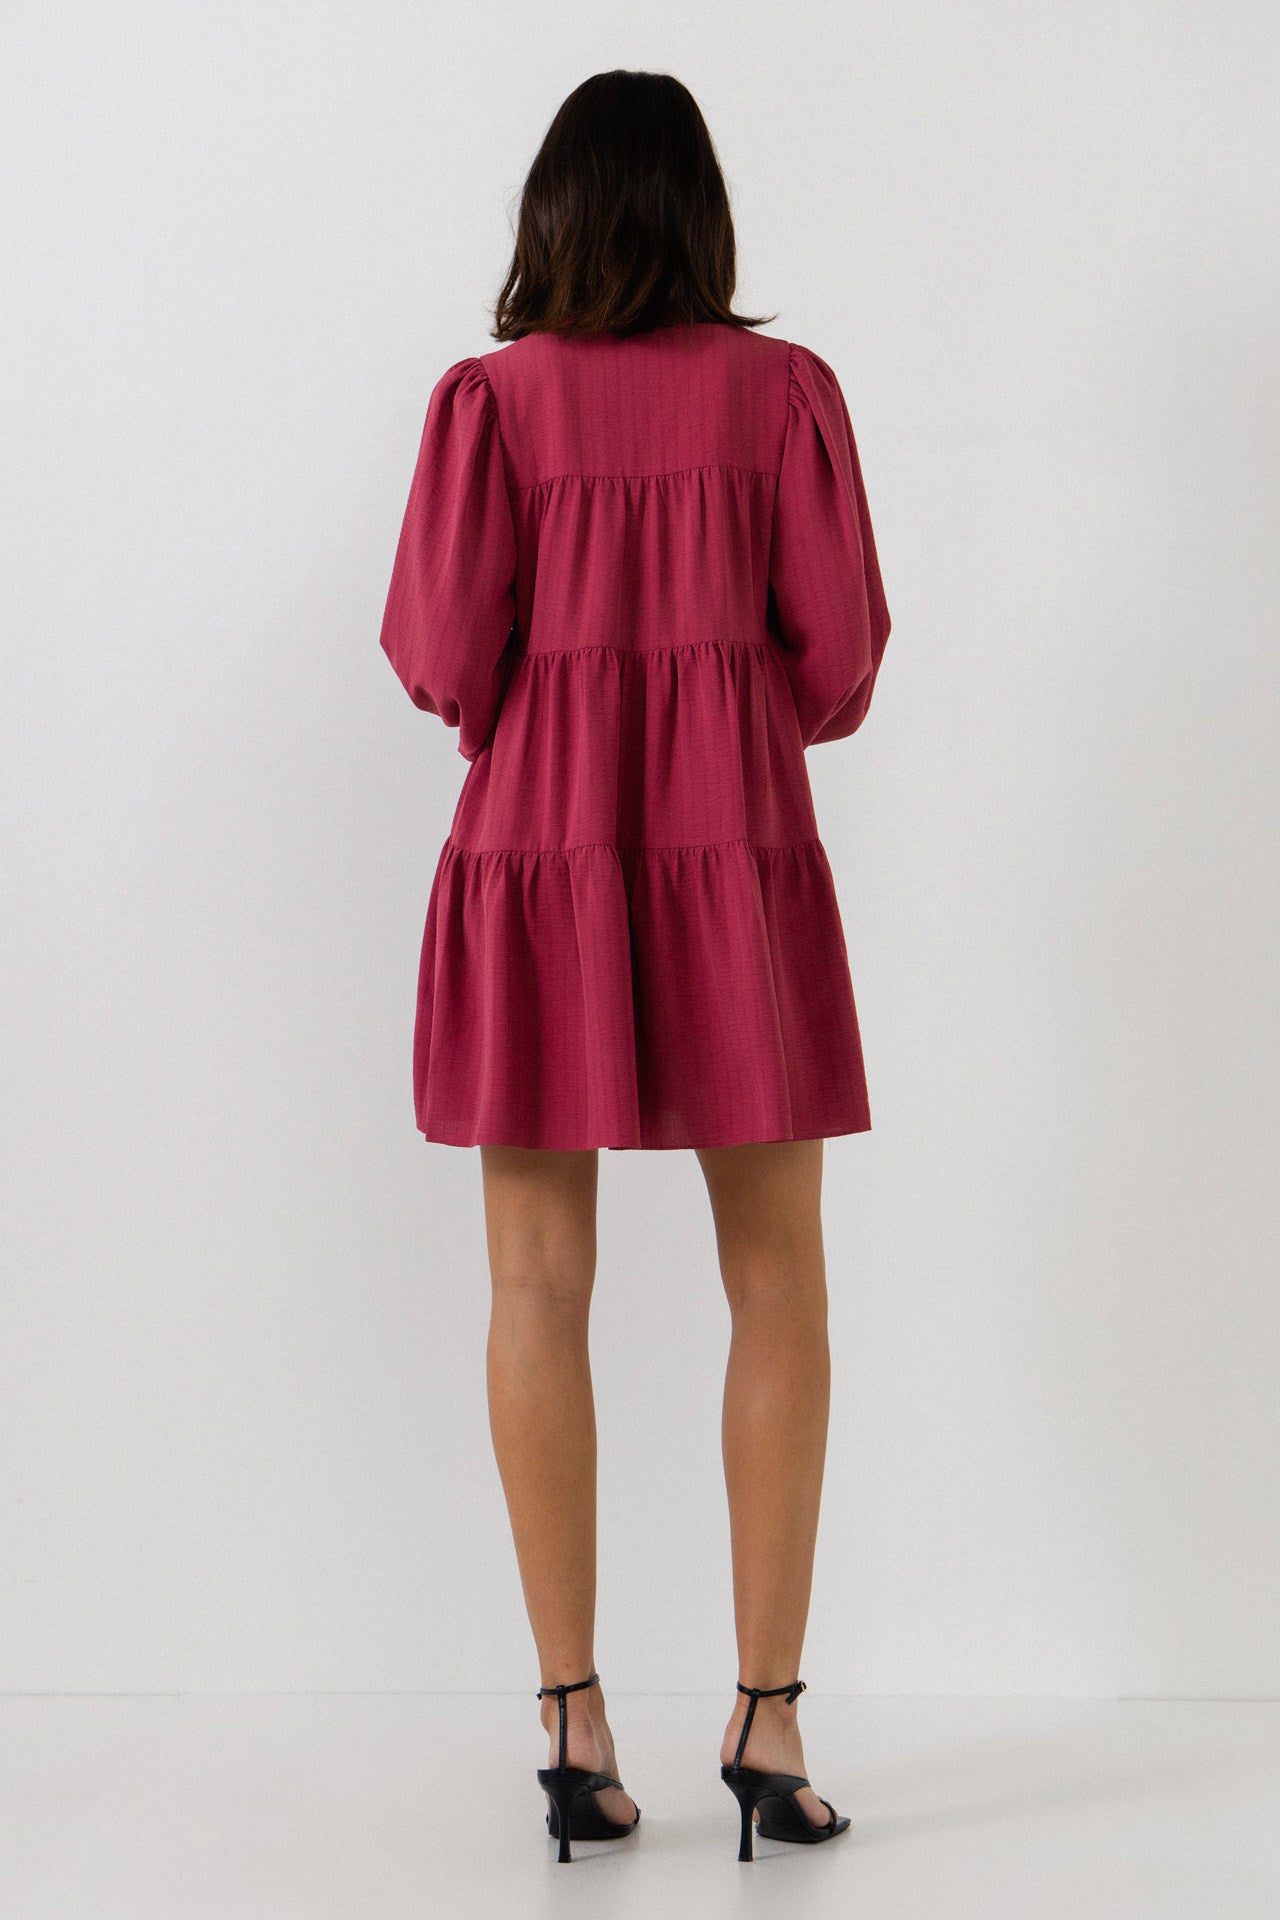 FREE THE ROSES - Texture Tiered Mini Dress - DRESSES available at Objectrare